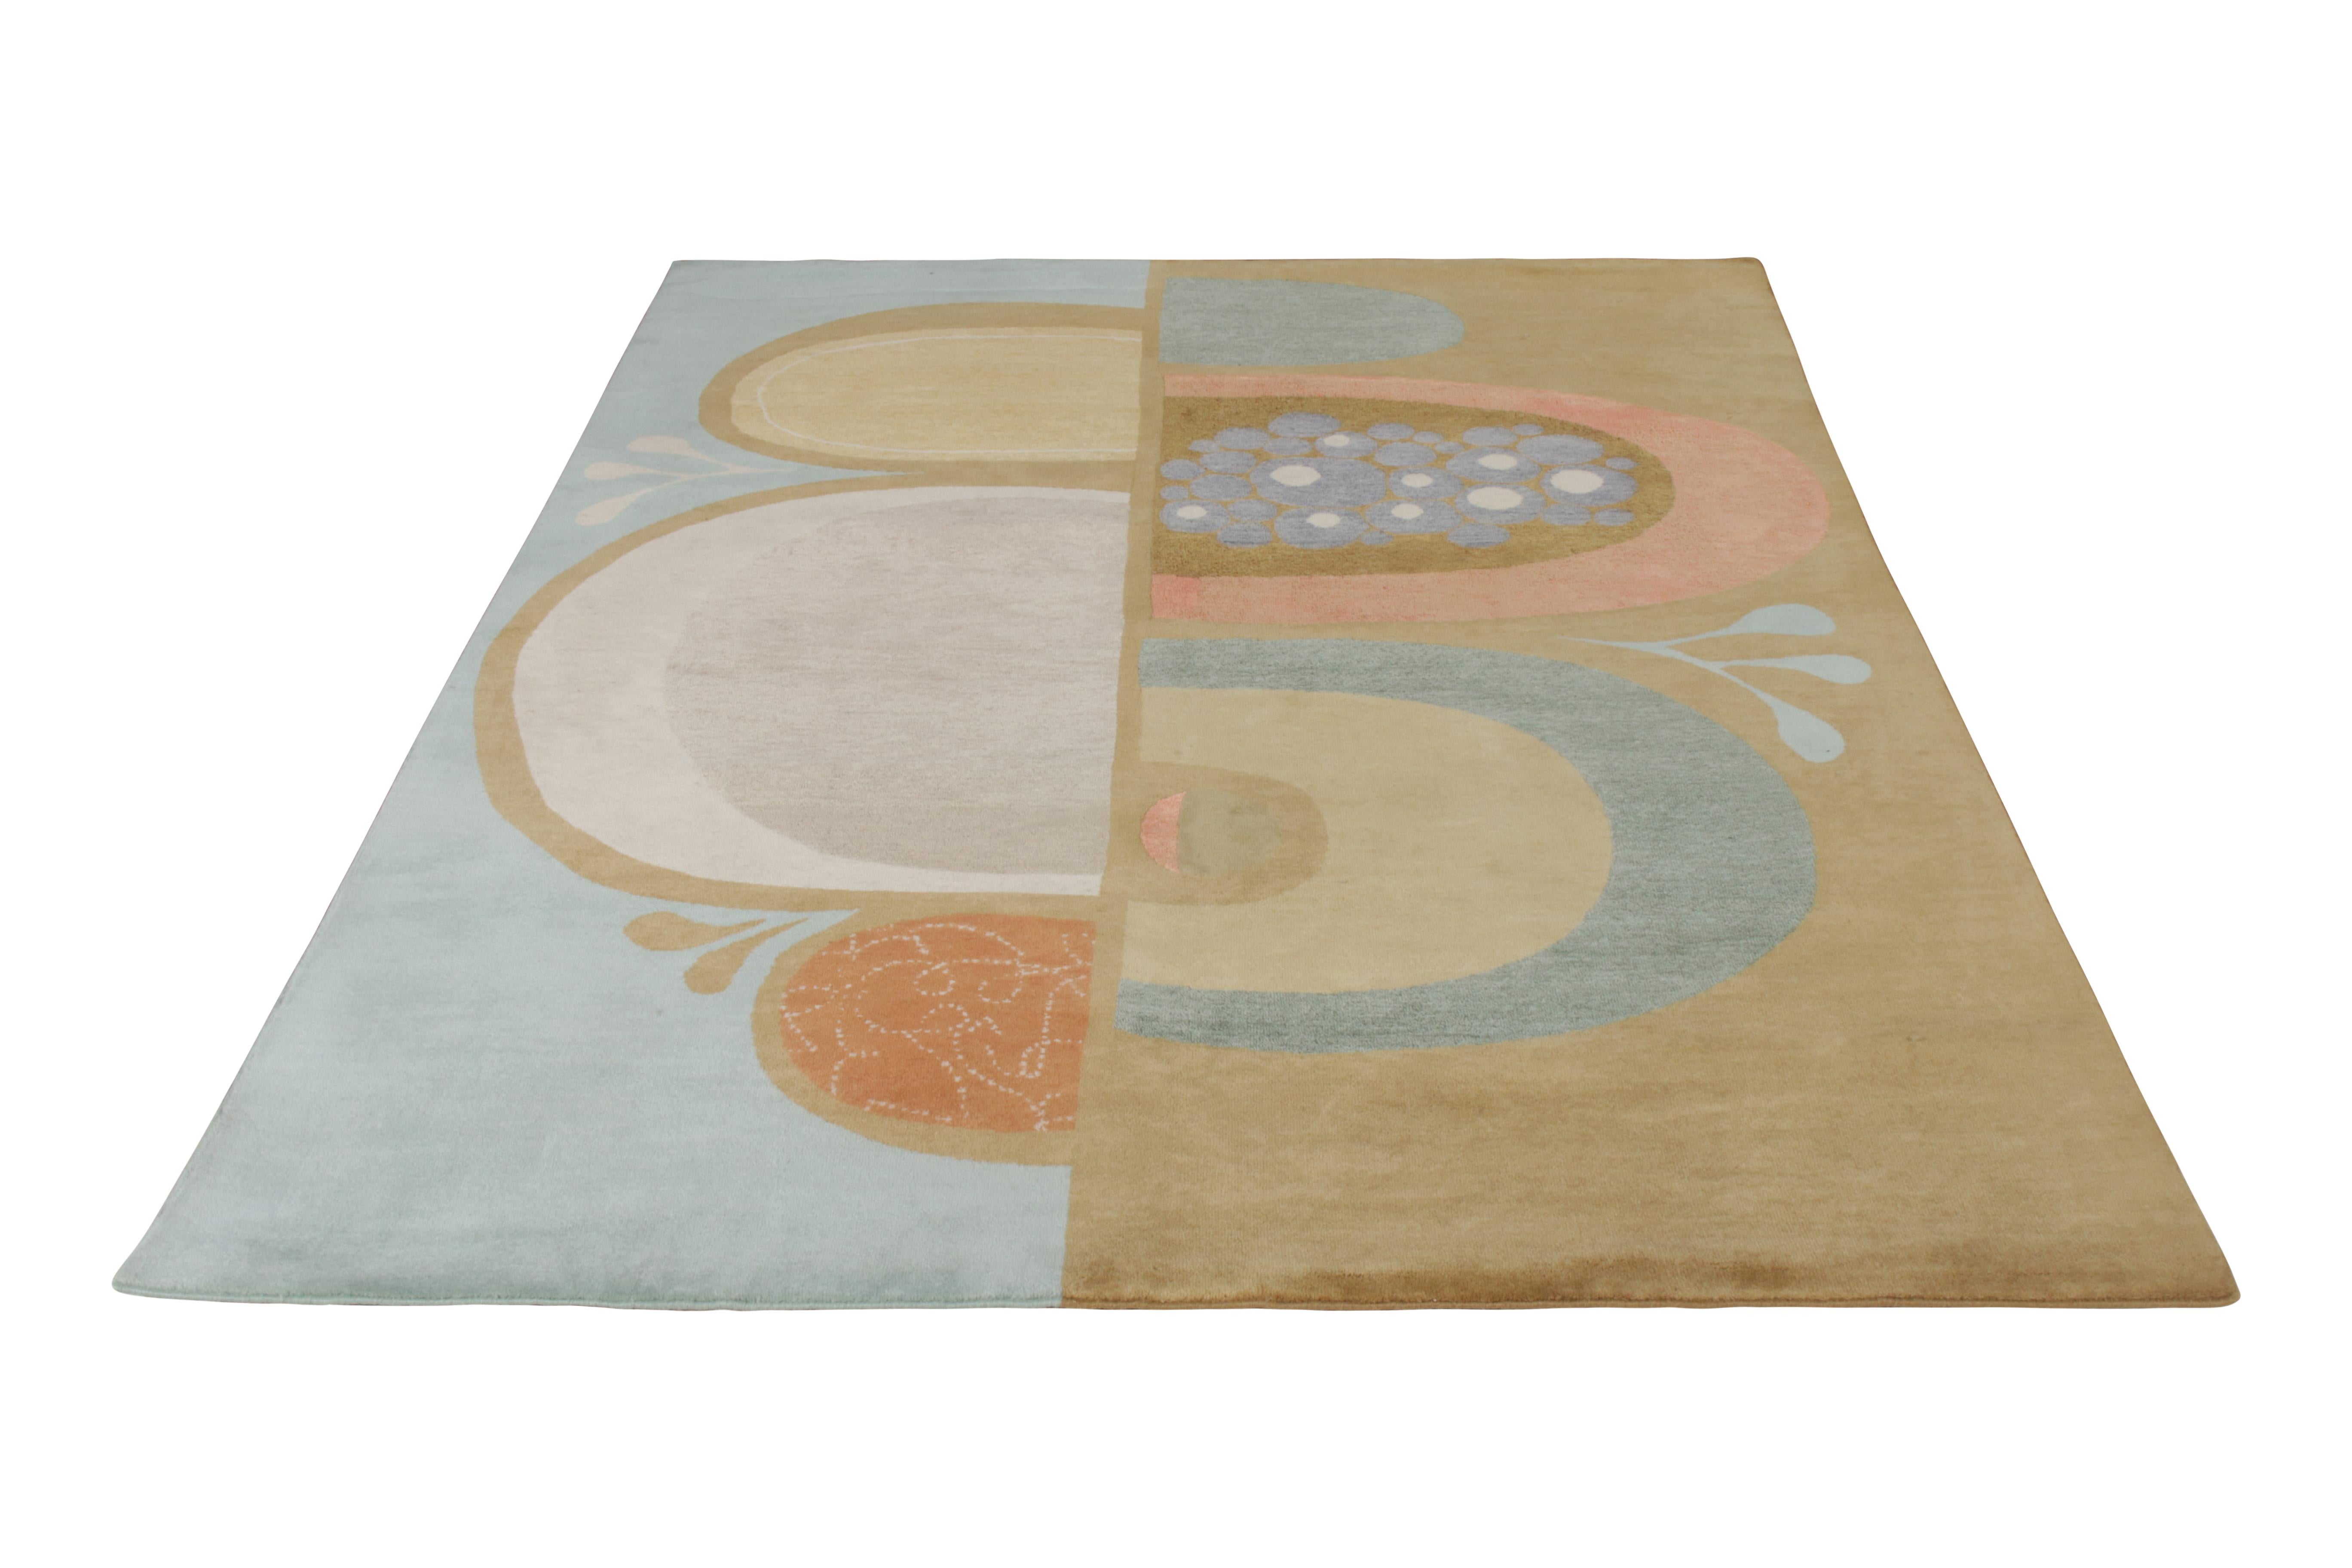 A 6 x 9 rug from Rug & Kilim’s bold Mid-Century Modern Collection, in collaboration with modern artist Jenn Ski. Hand knotted in a unique wool and all-natural silk, exploring varied atomic age styles in playful distinction.

On the design: This